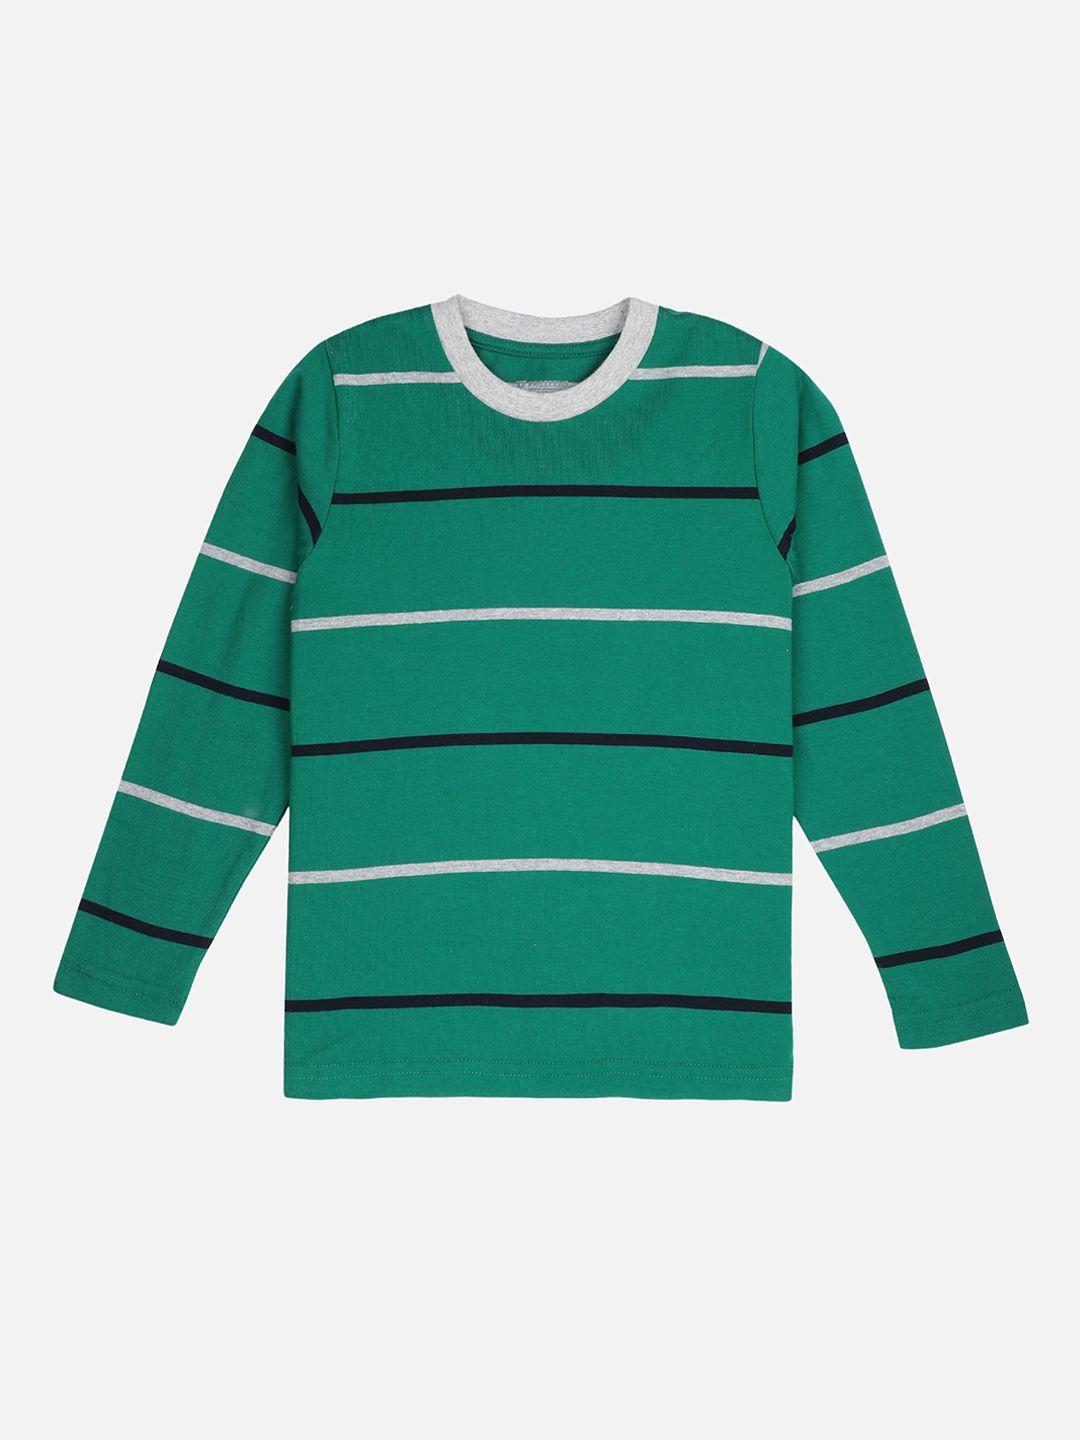 proteens boys green striped round neck t-shirt